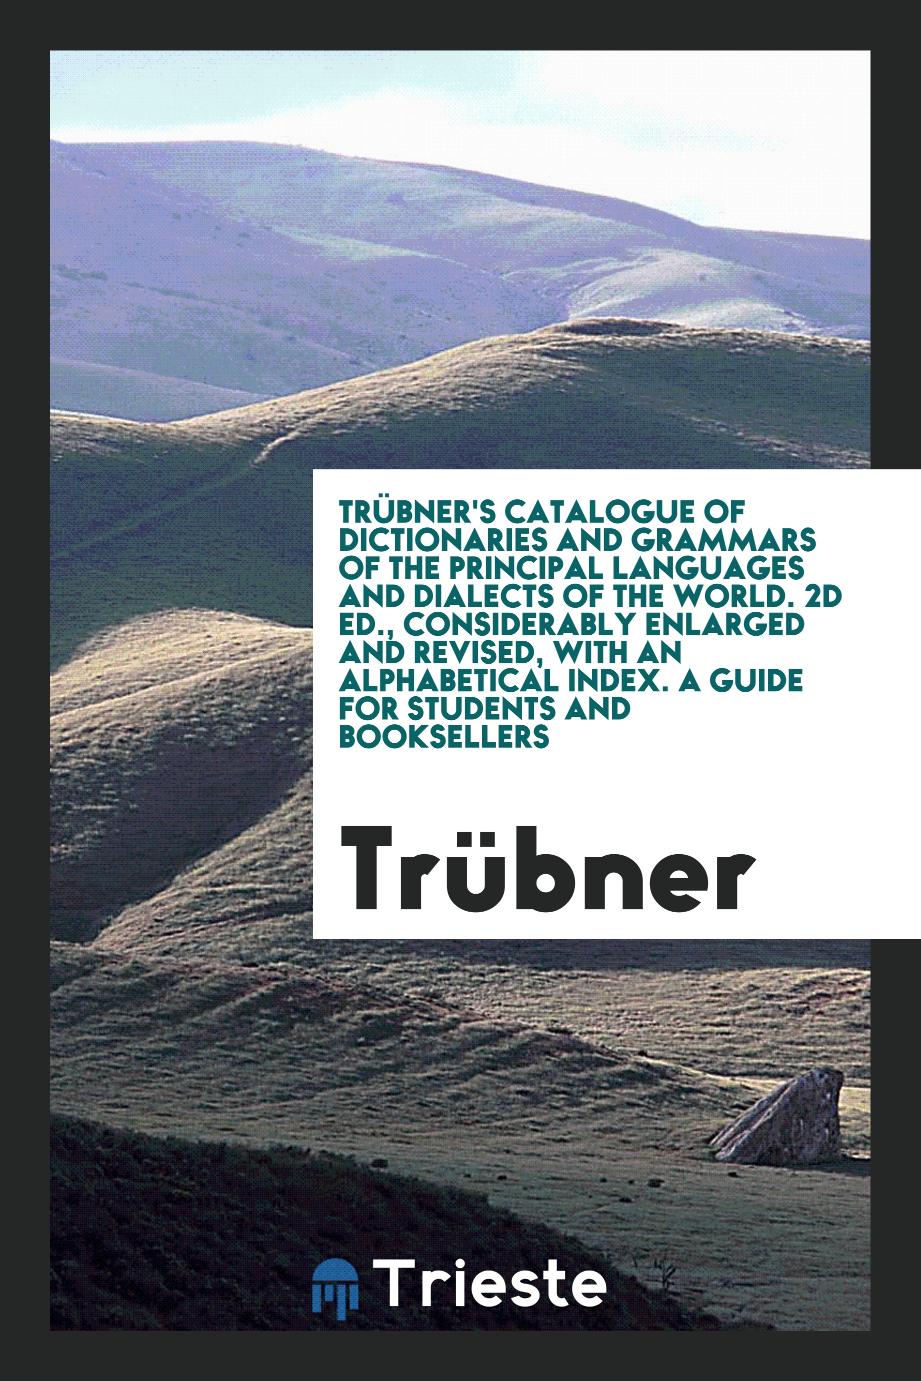 Trübner's catalogue of dictionaries and grammars of the principal languages and dialects of the world. 2d ed., considerably enlarged and revised, with an alphabetical index. A guide for students and booksellers